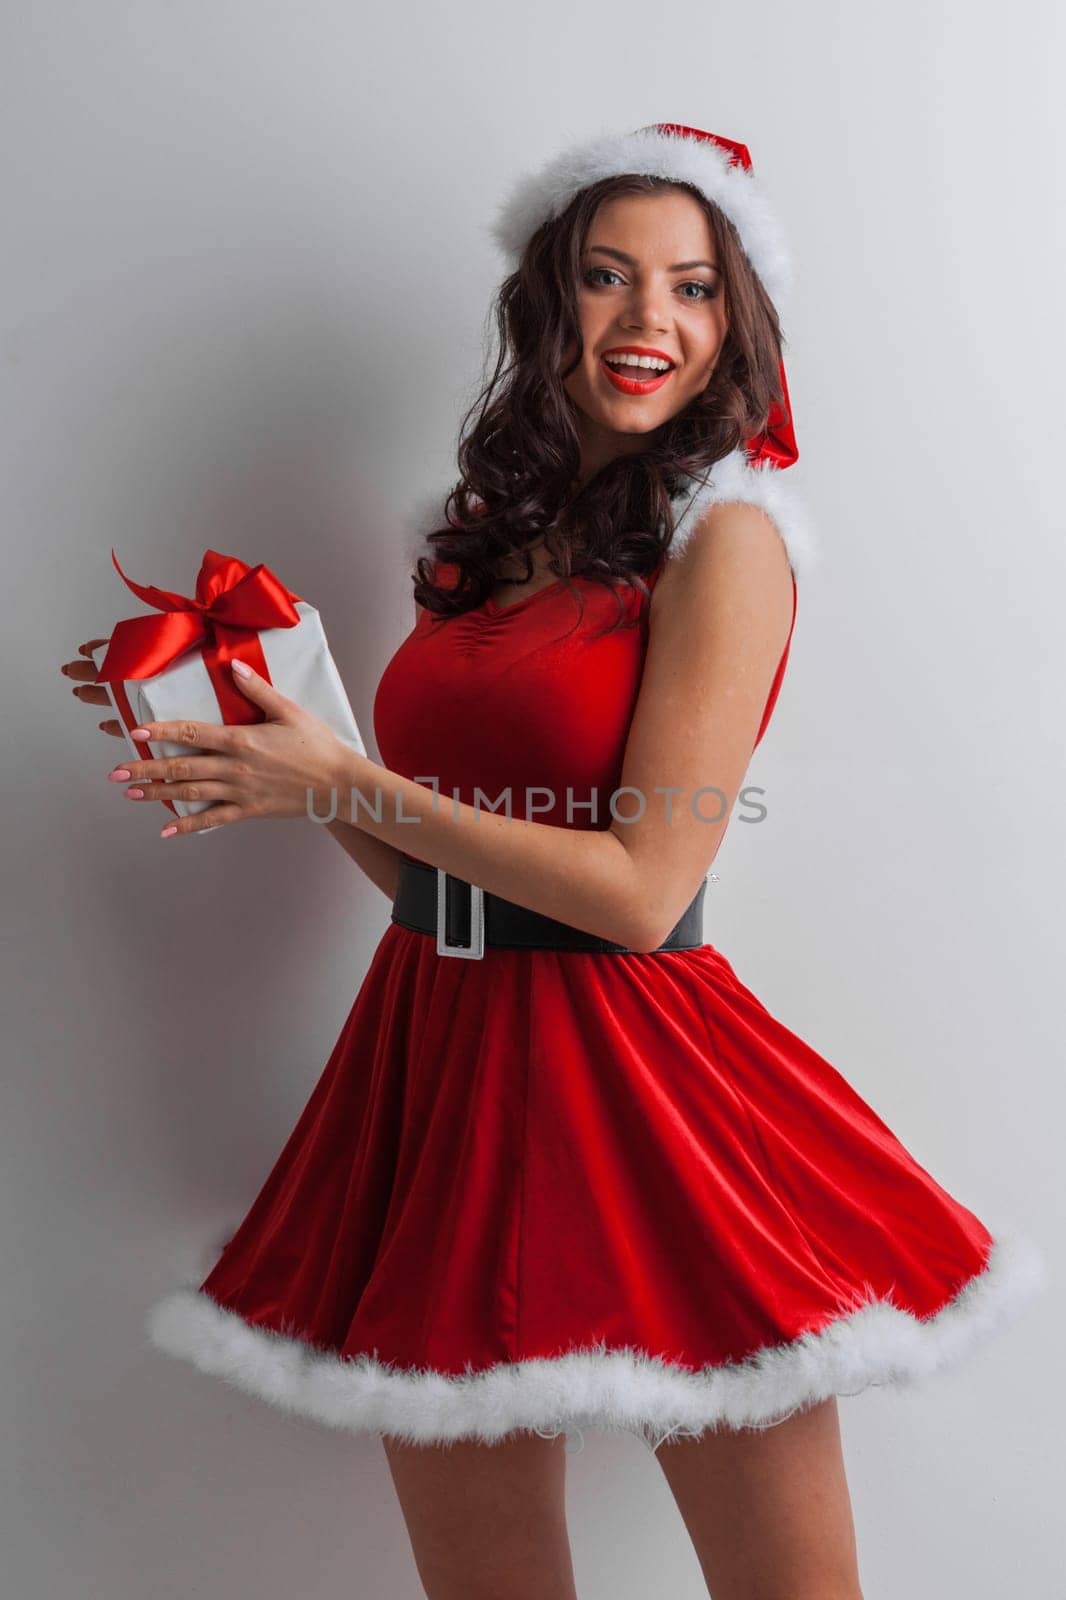 Beautiful young woman in Santa dress and hat celebrating Christmas holding gift box